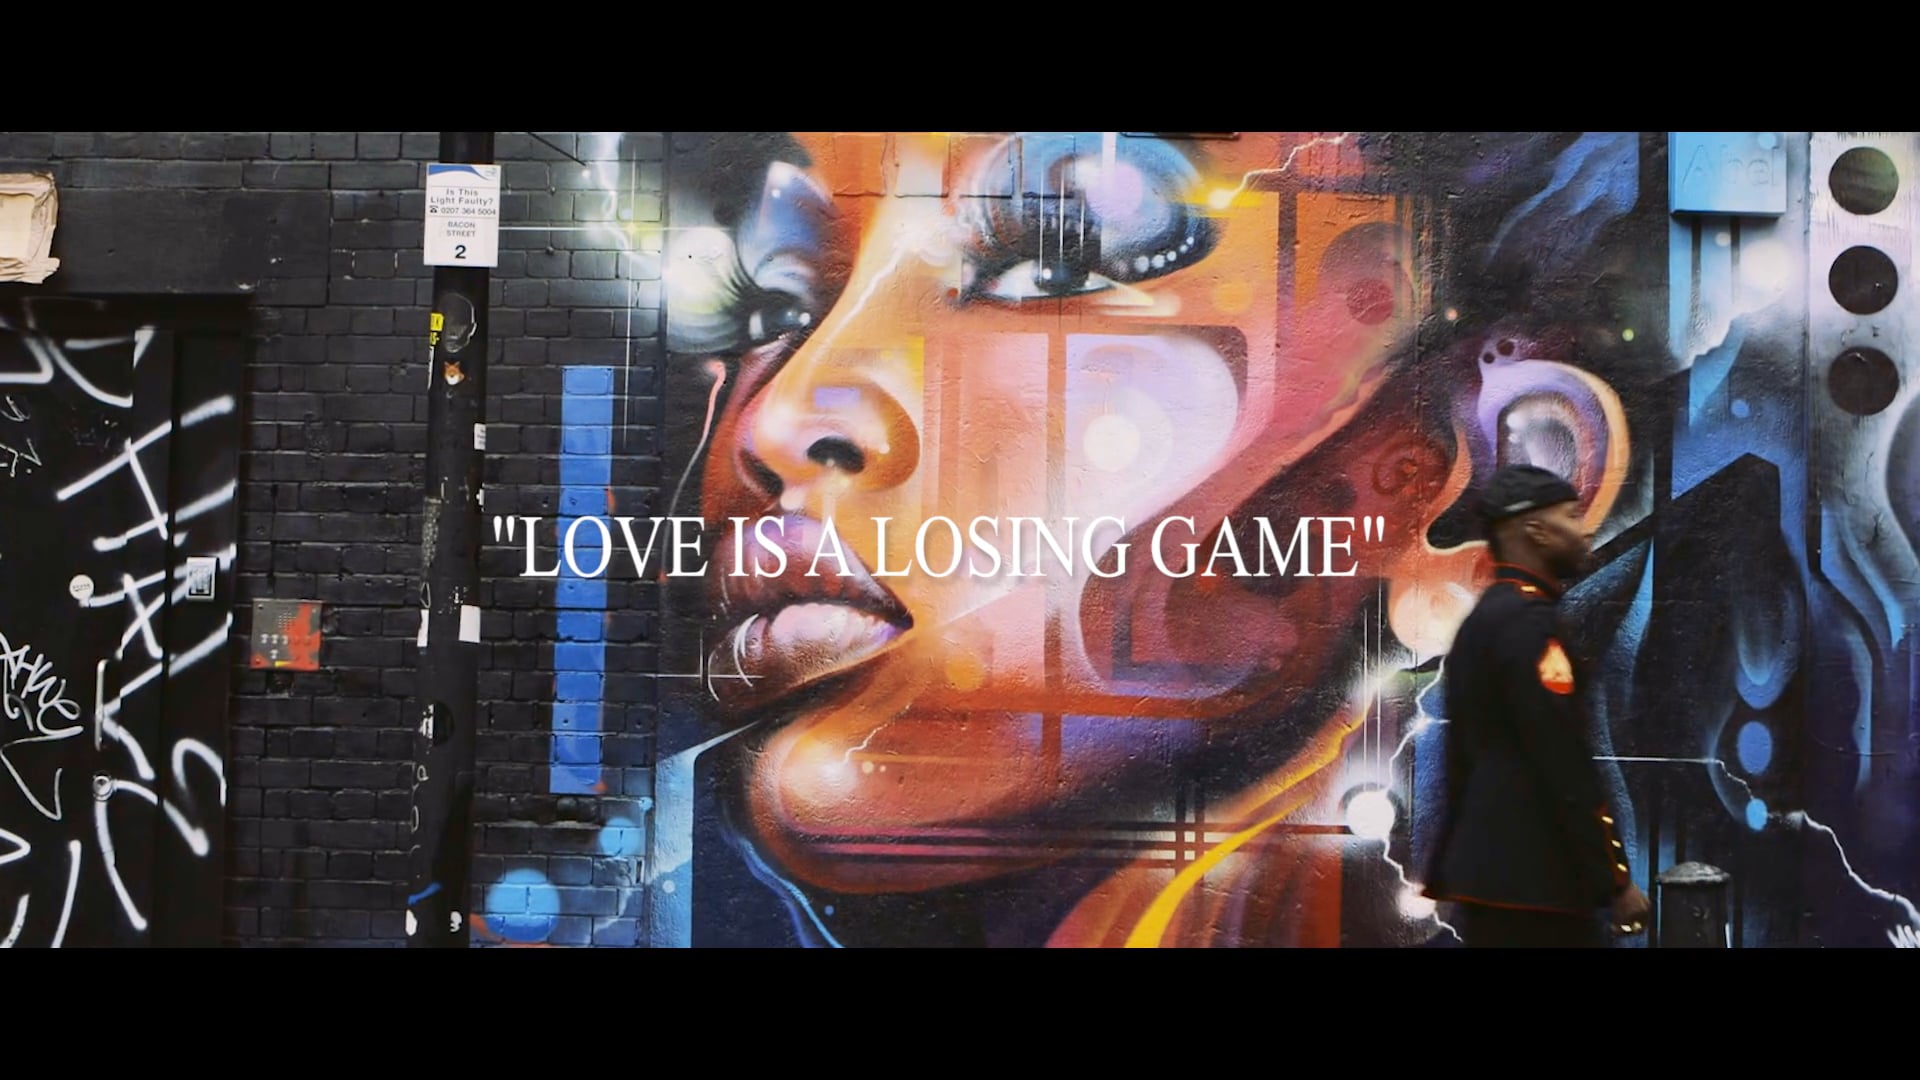 LOVE IS A LOSING GAME